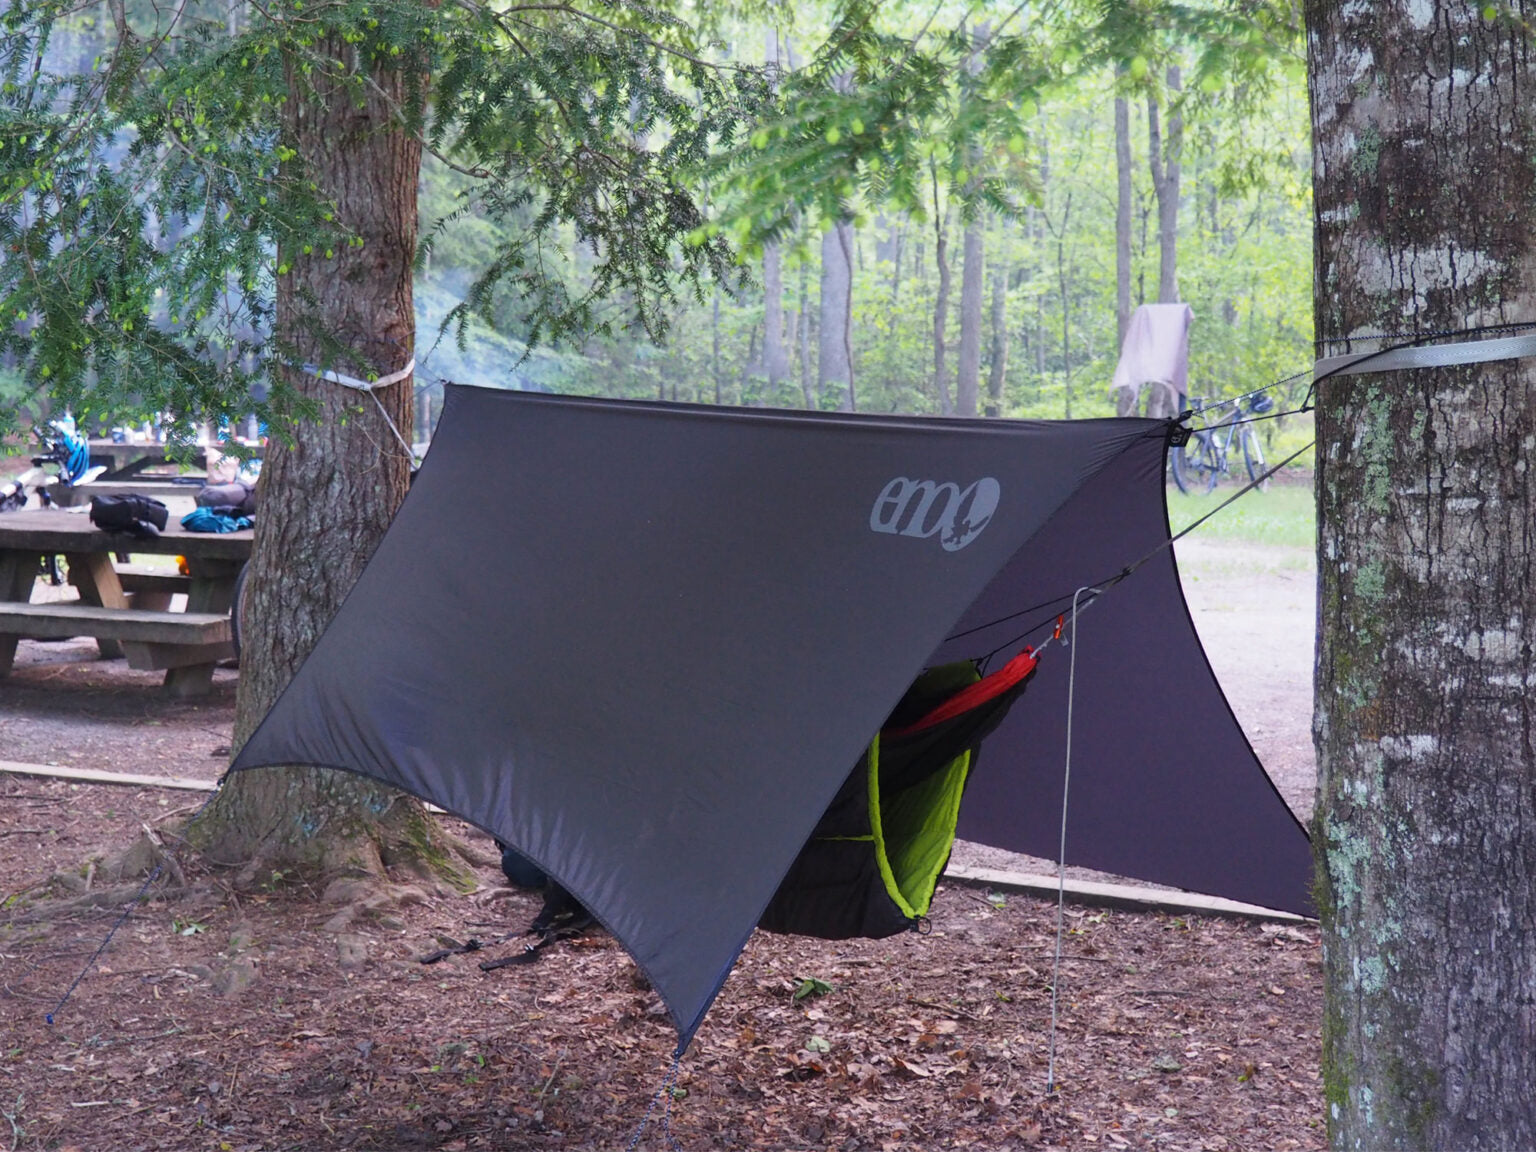 15 of the Most Useful (and Hilarious) Camping Tips | ENO